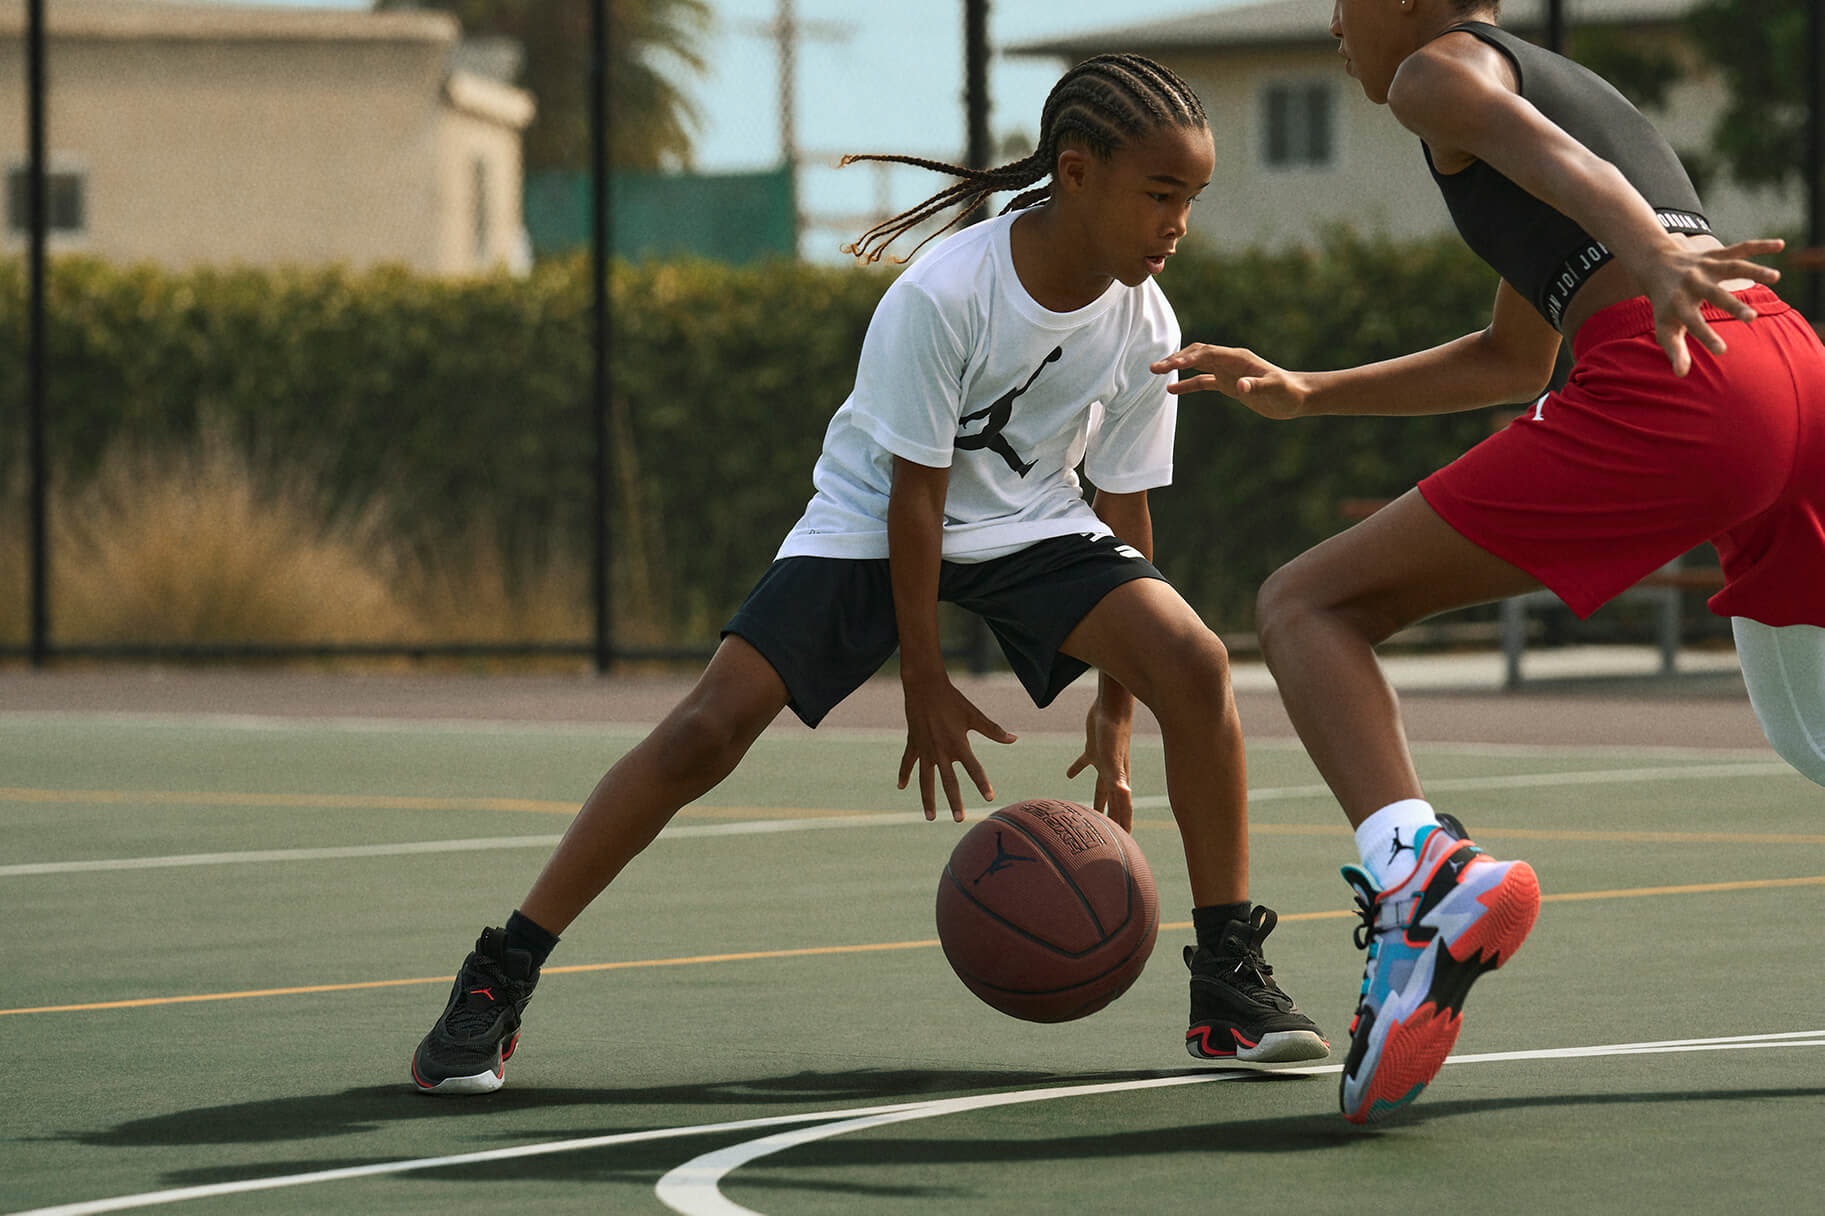 The Best Basketball Shorts for Boys by Nike